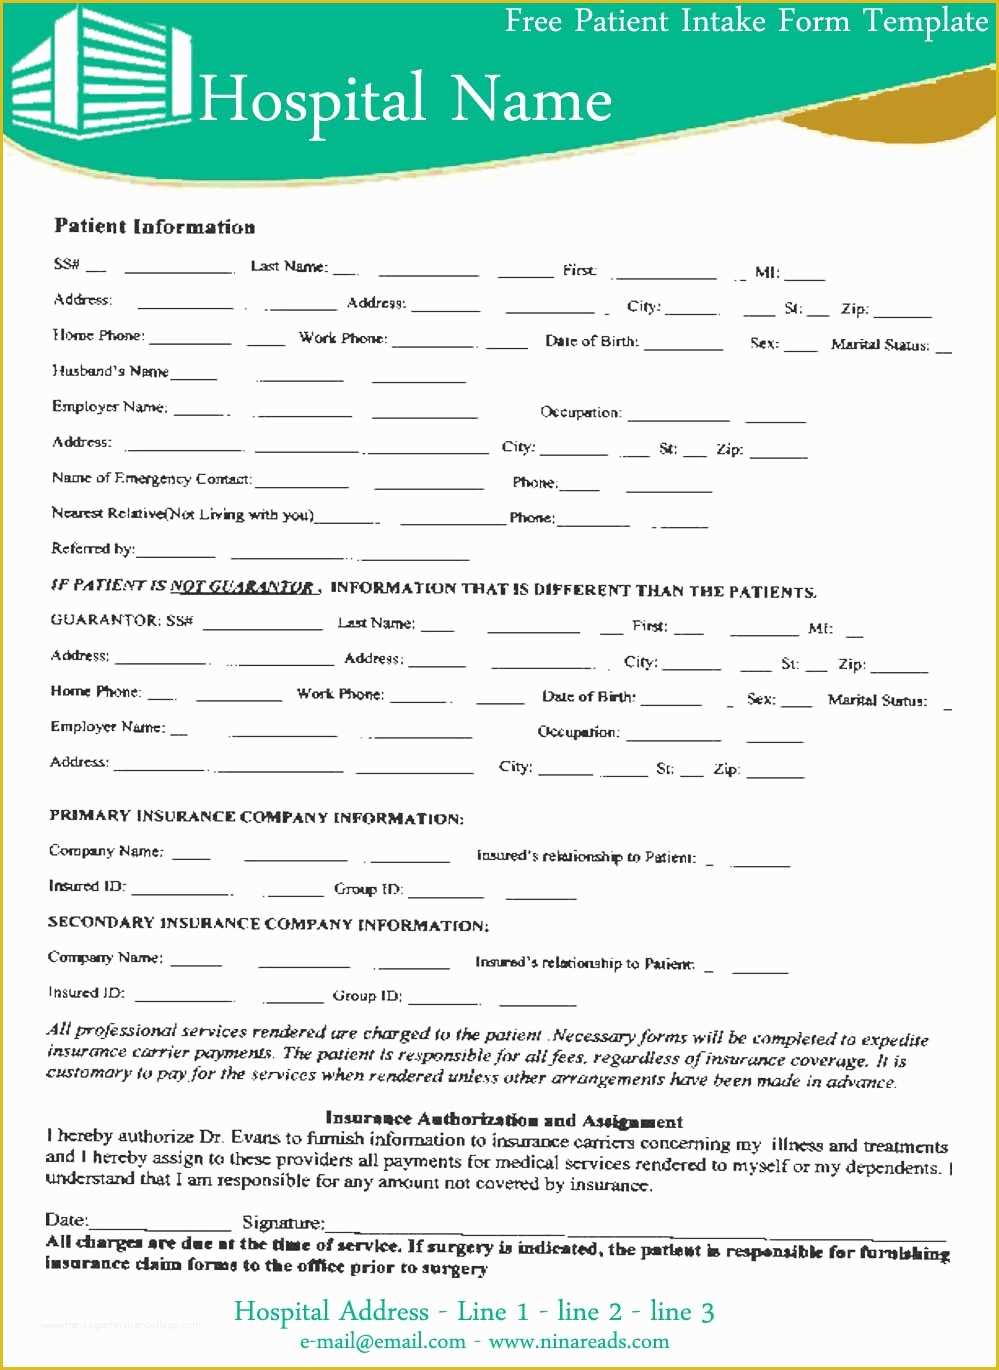 Free Patient Intake form Template Of Free Patient Intake form Template Ninareads